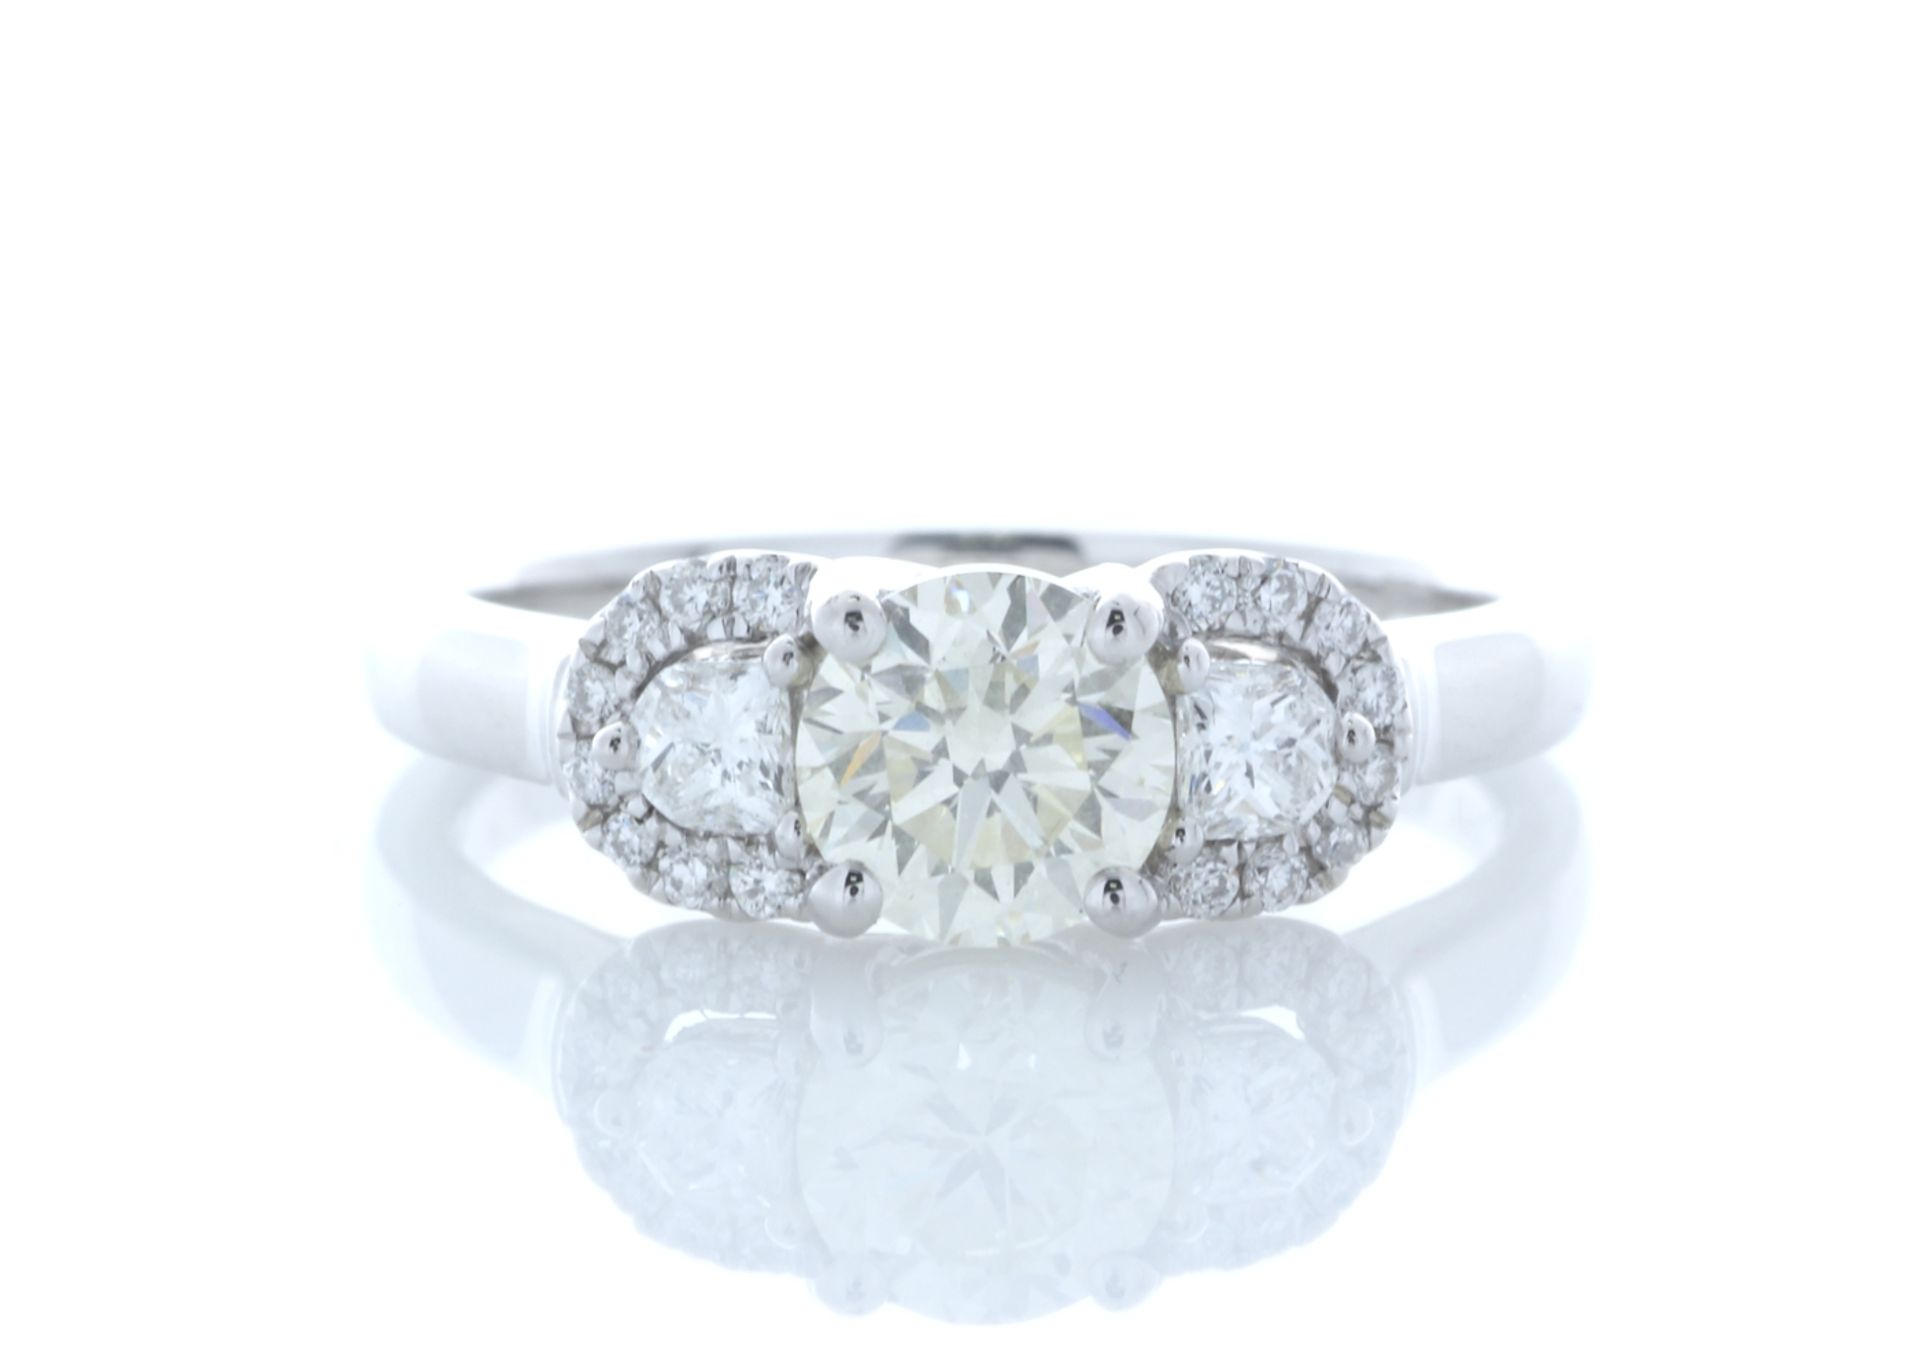 18ct White Gold Three Stone Claw Set Diamond Ring (0.75) 1.02 Carats - Valued By IDI £17,425.00 -